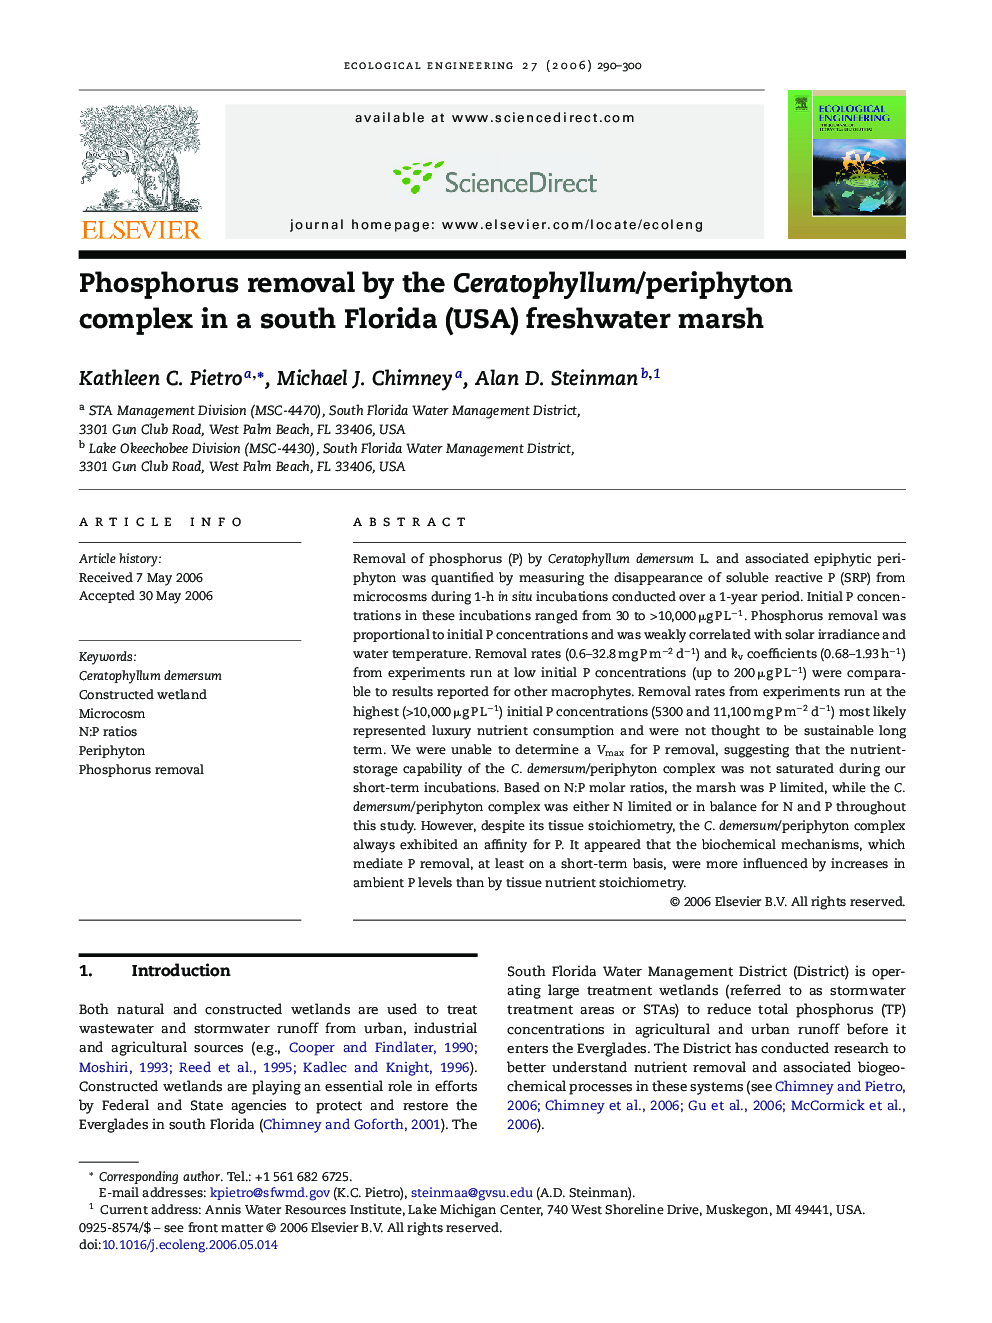 Phosphorus removal by the Ceratophyllum/periphyton complex in a south Florida (USA) freshwater marsh